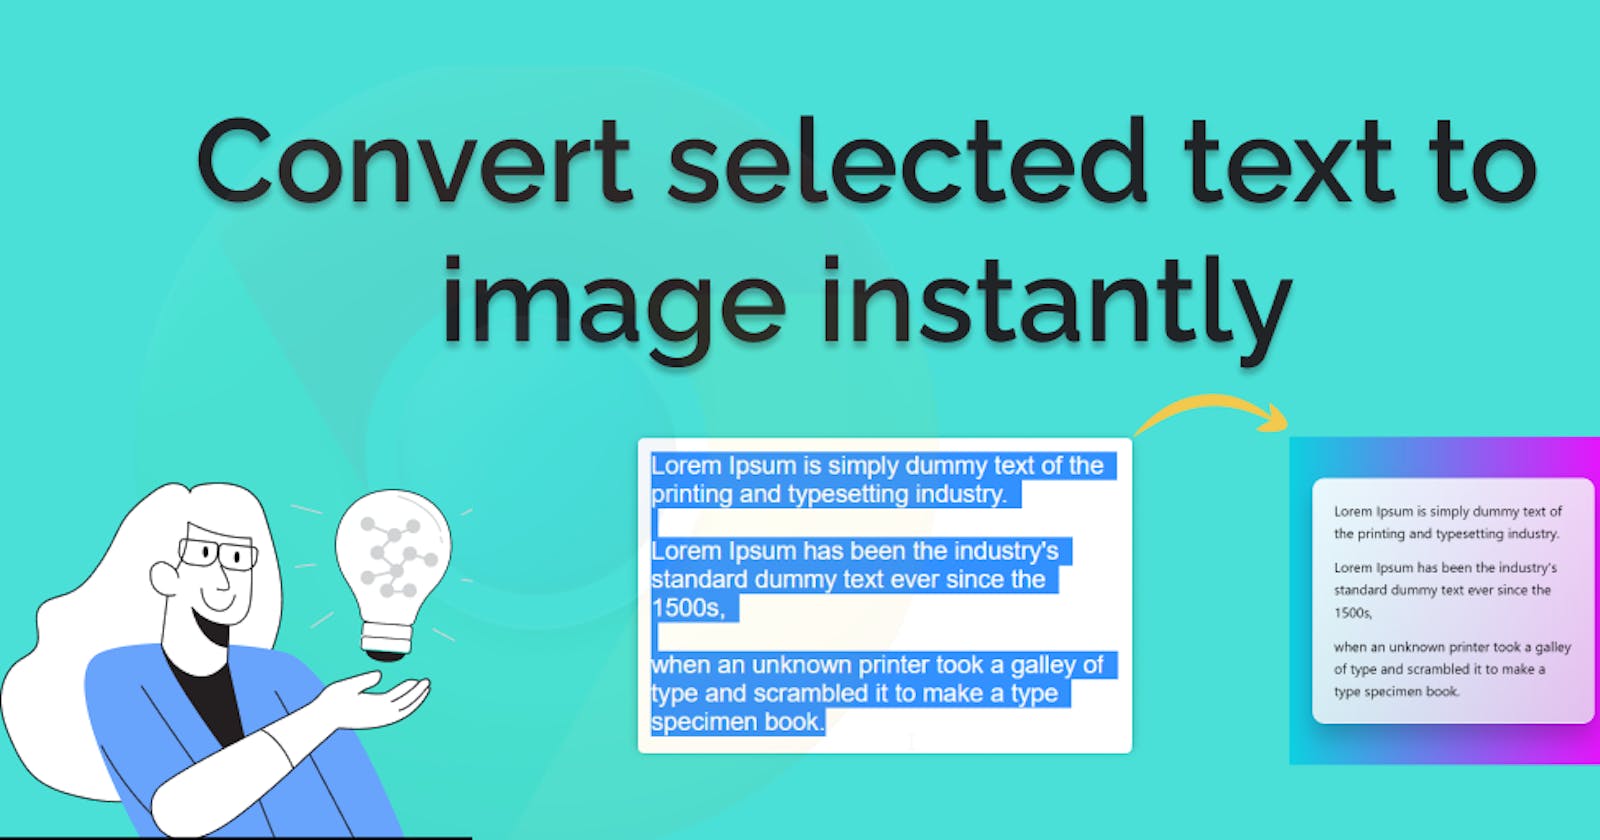 Convert text selection to image instantly using this tool